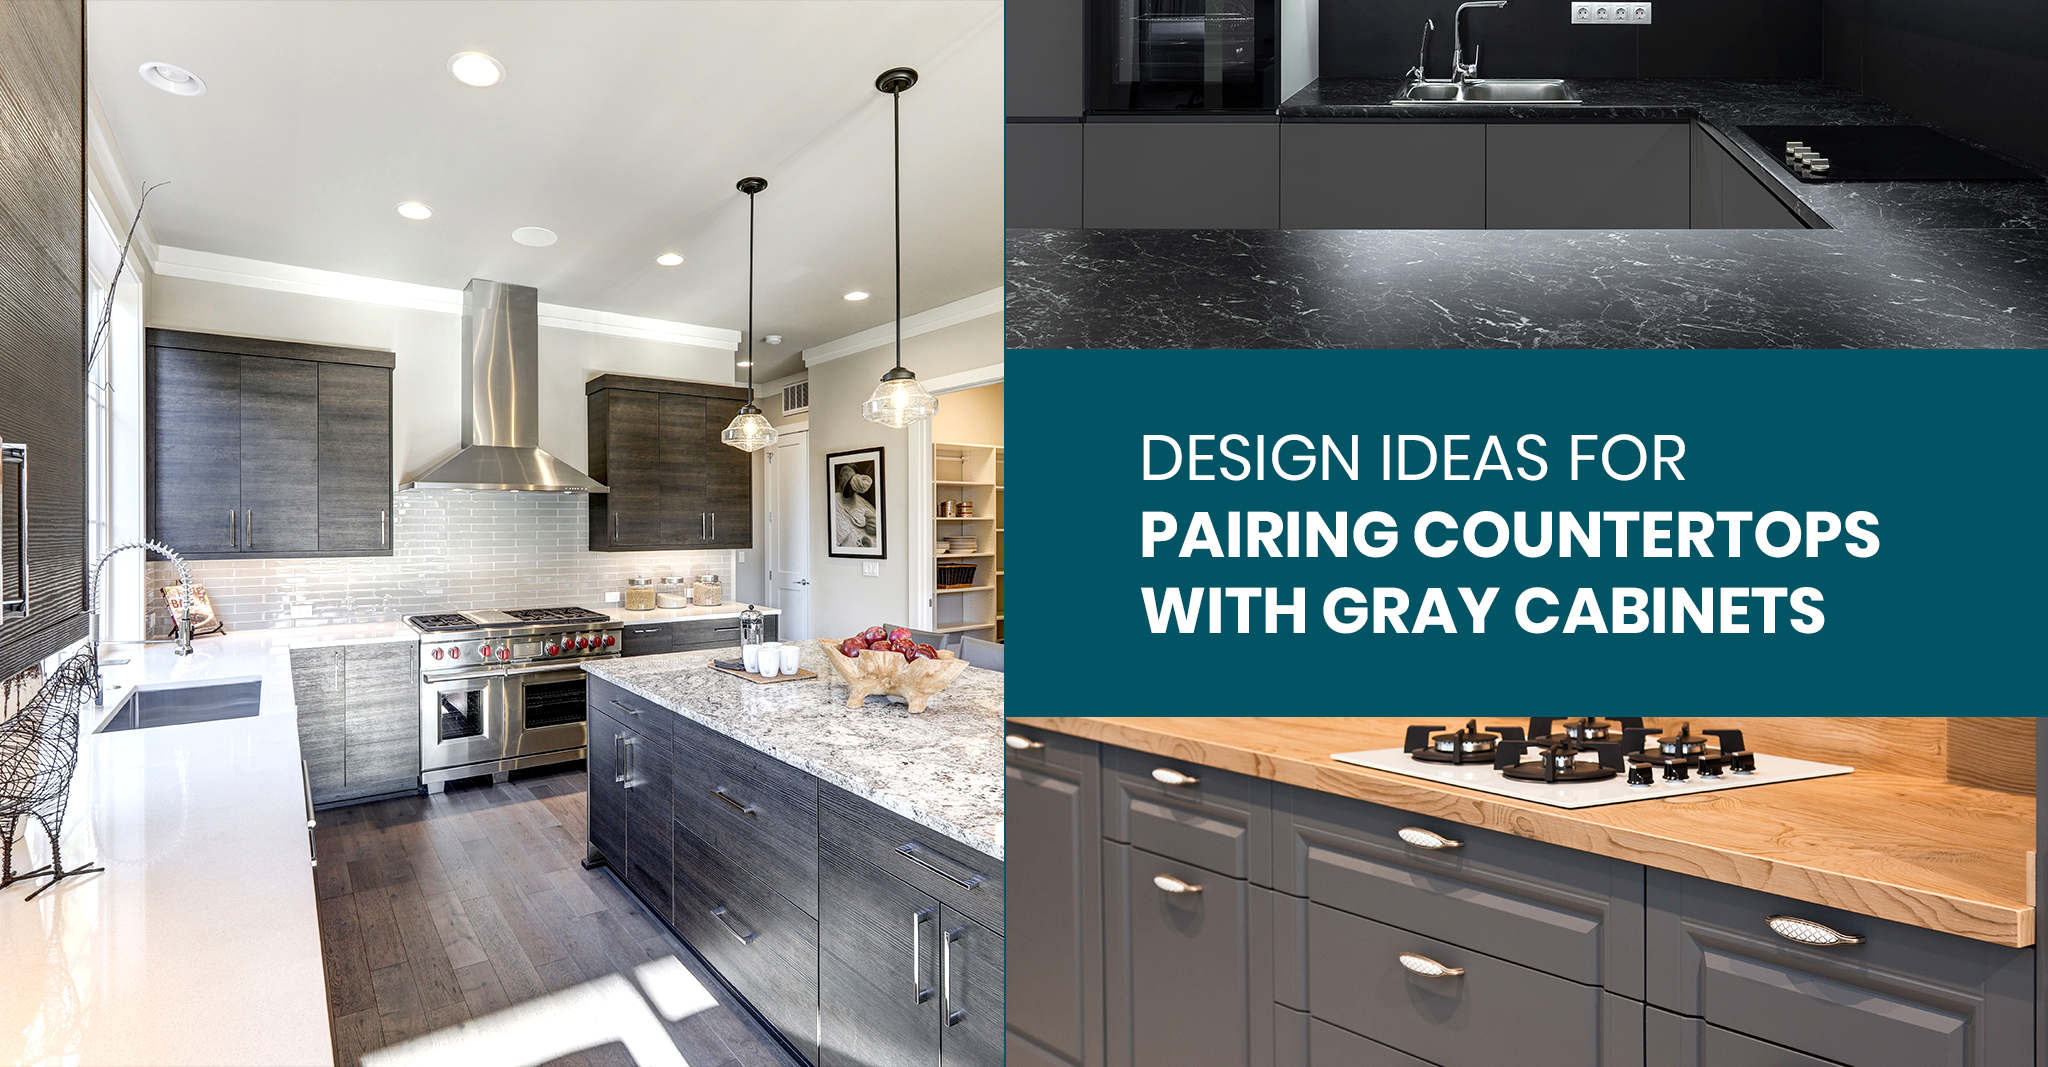 Design Ideas for Pairing Countertops with Gray Cabinets